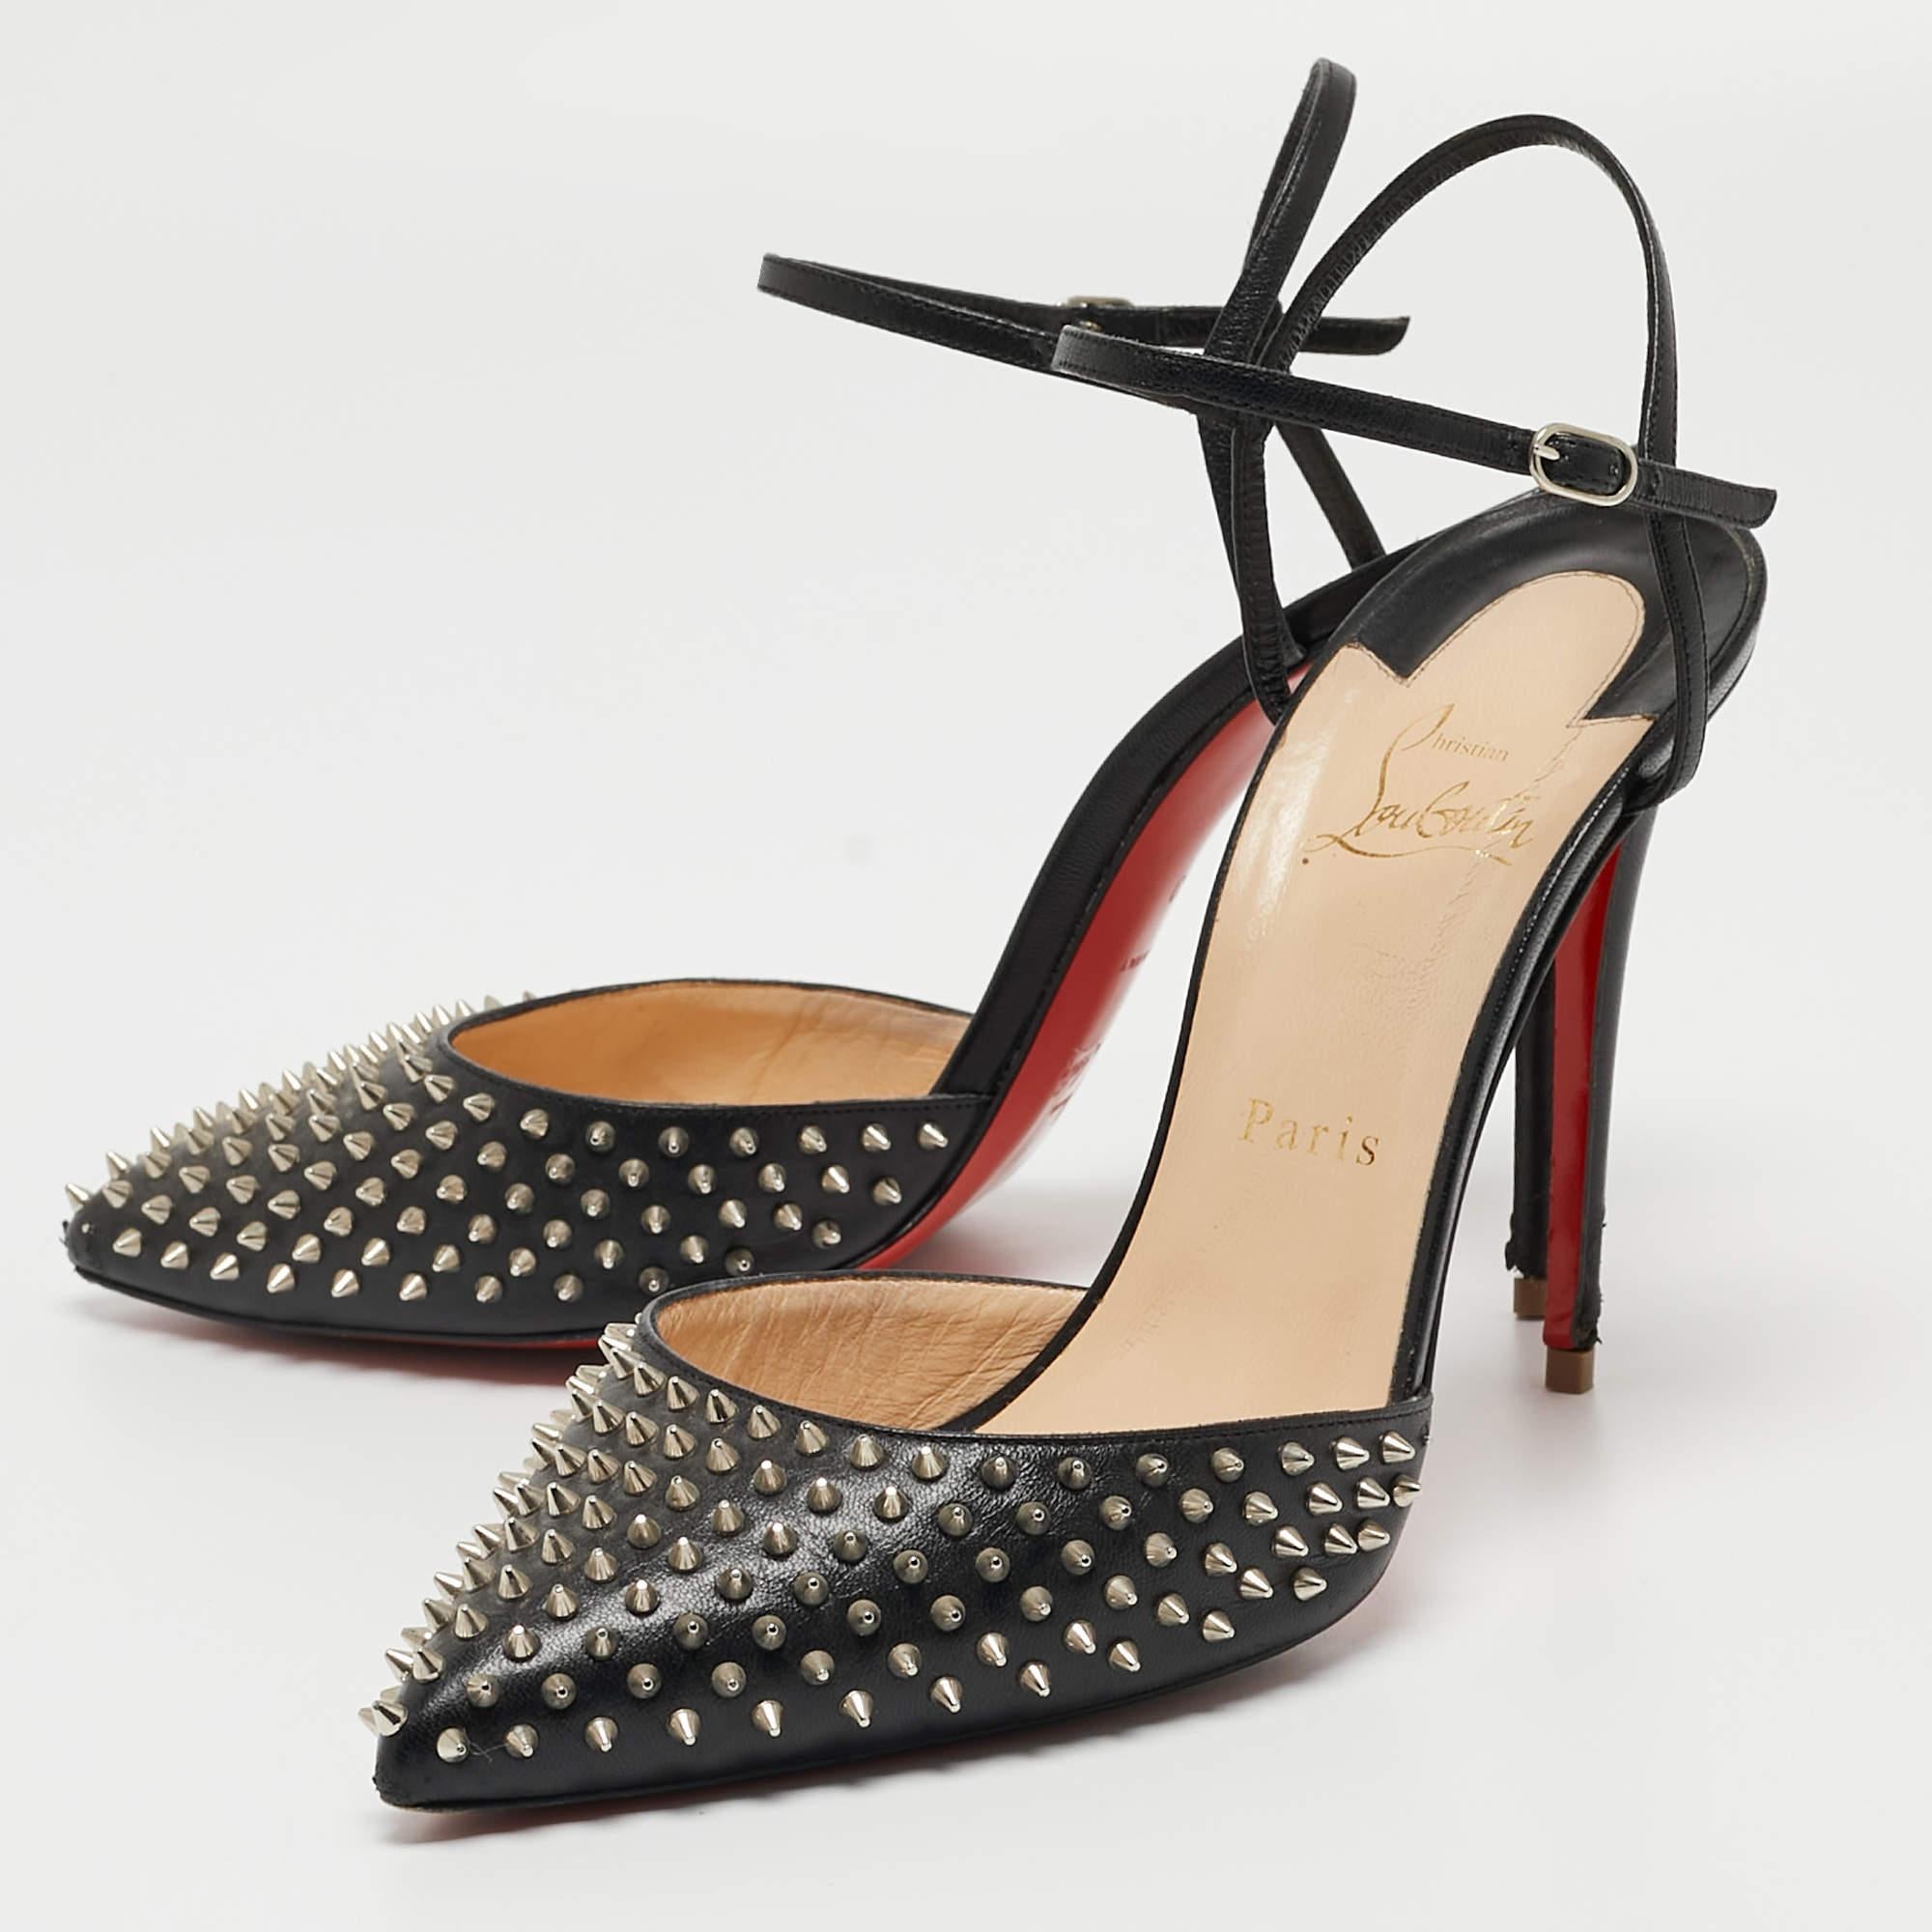 These pumps from Christian Louboutin are meant to be a loved choice. Wonderfully crafted and balanced on sleek heels, the pumps will lift your feet in a stunning silhouette.

